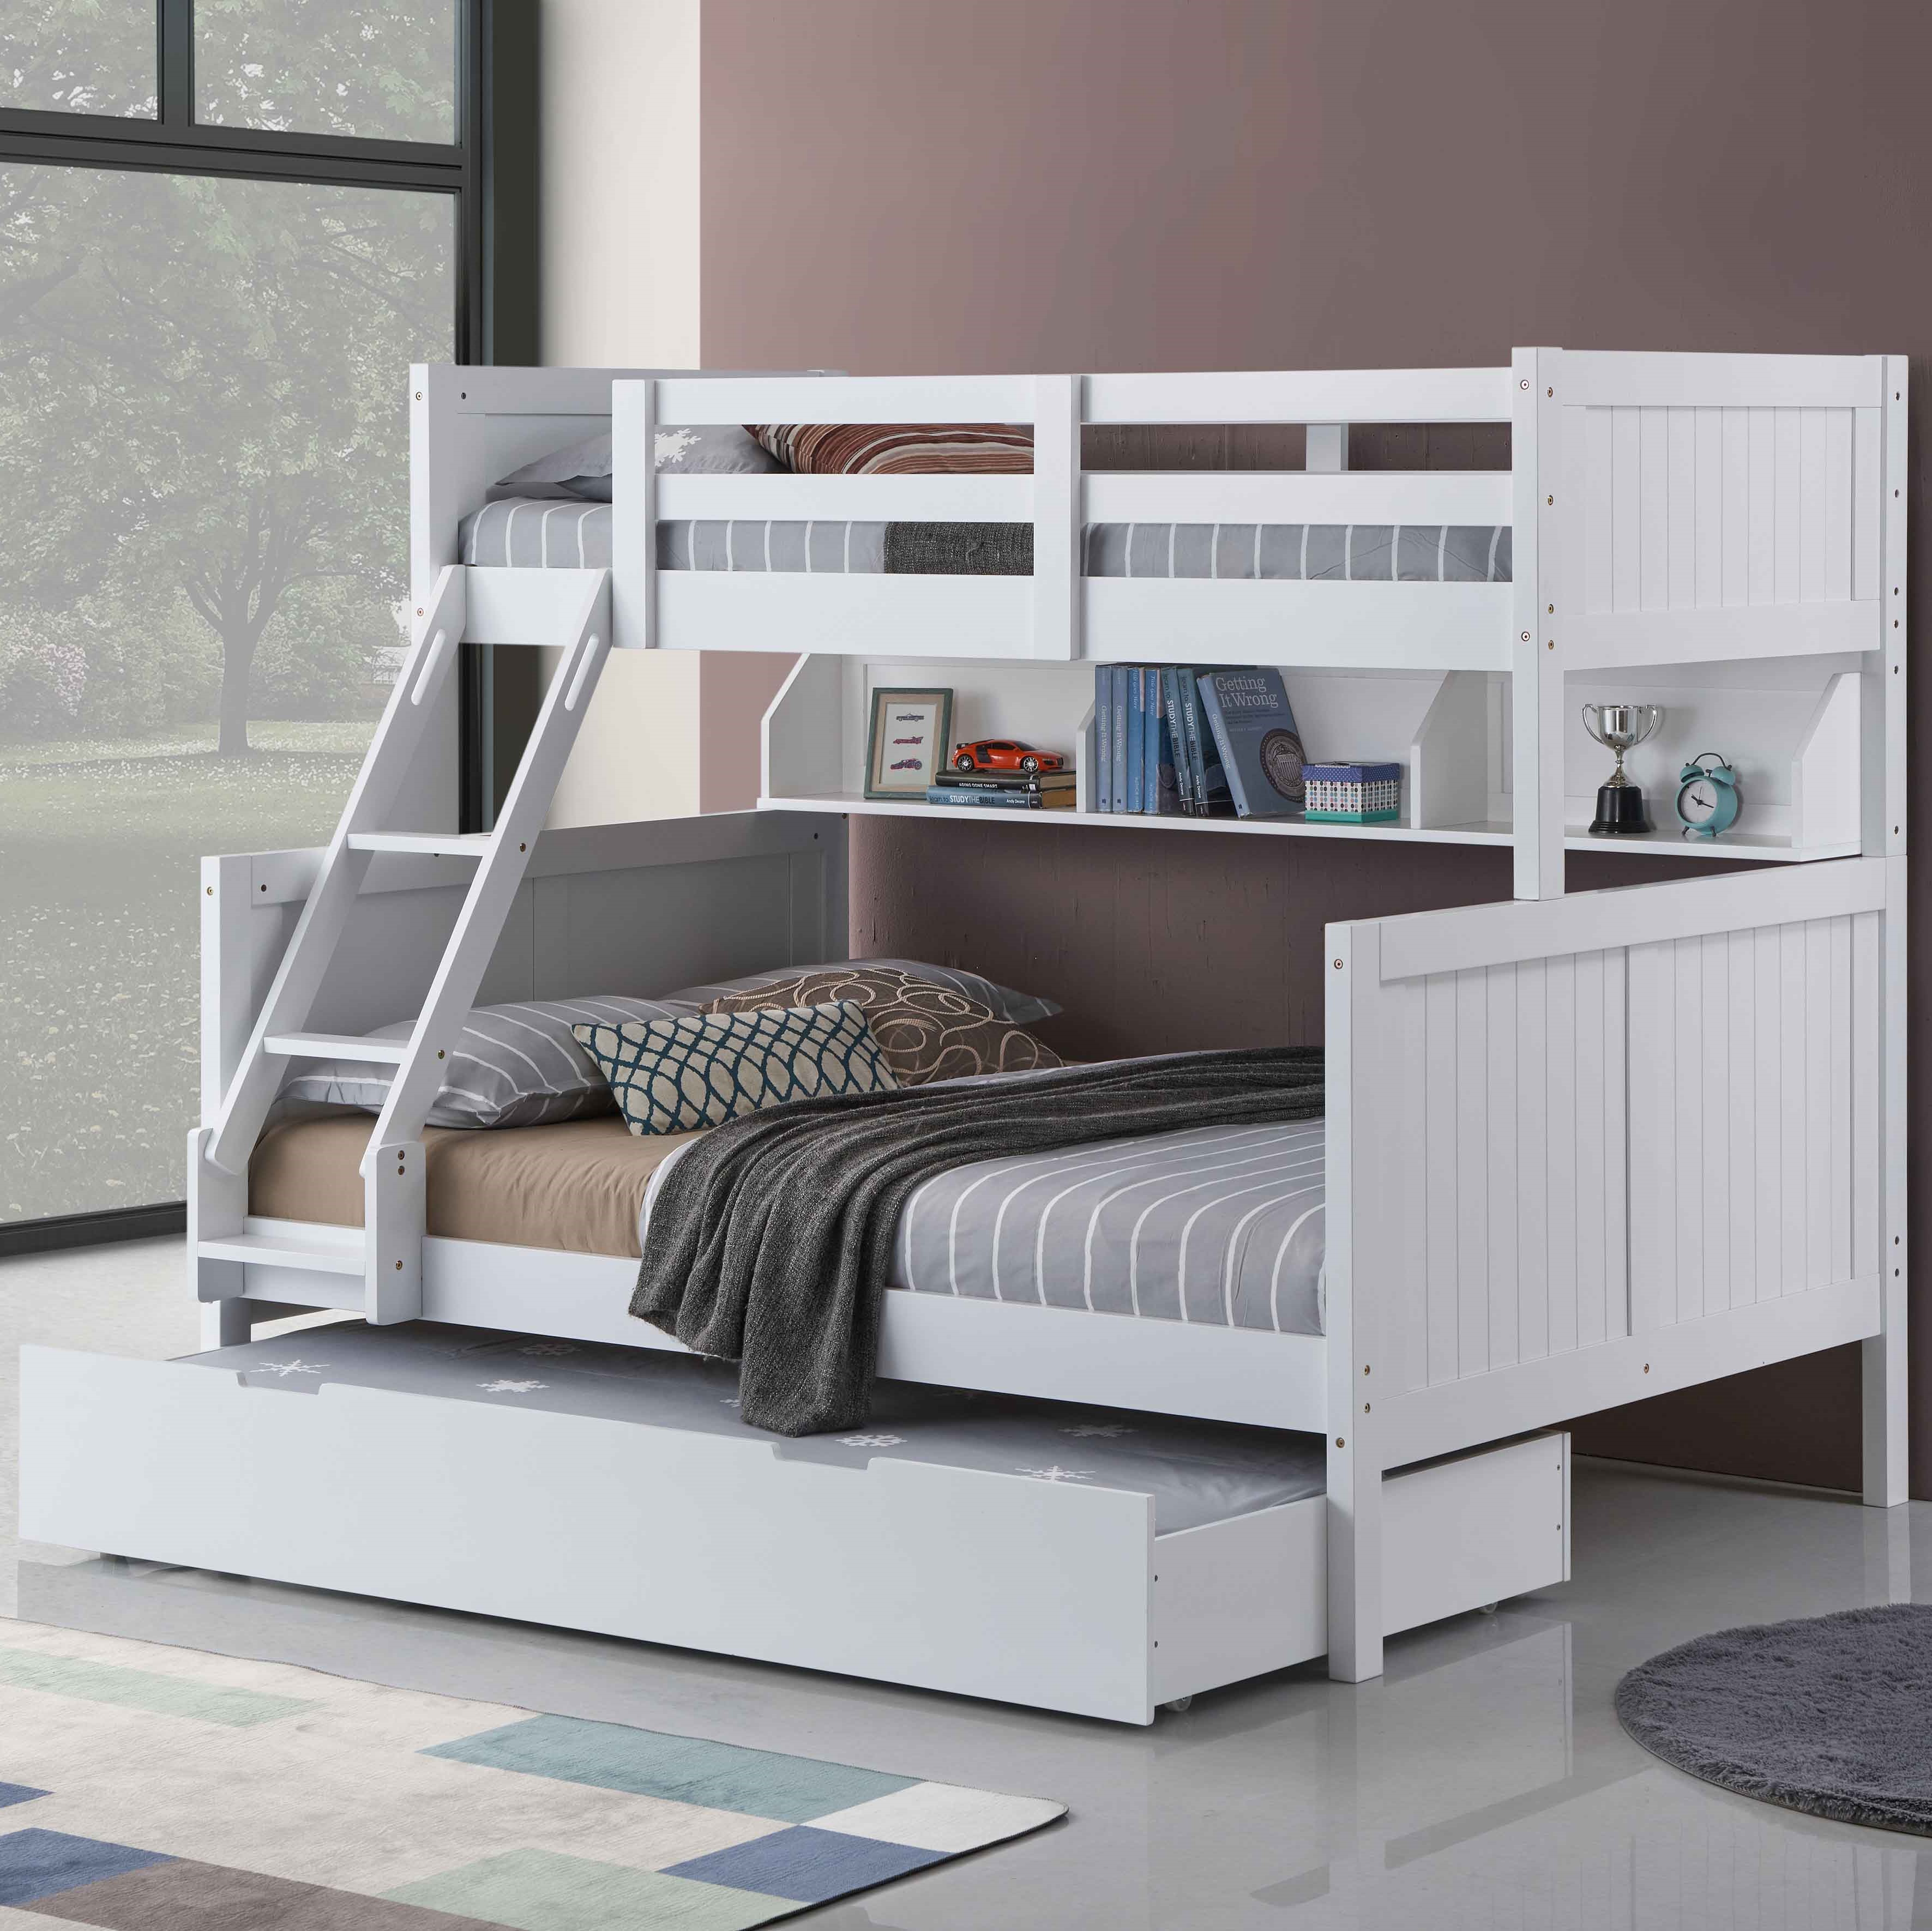 Double Bunk Bed Storage Trundle, Bunk Bed With Guest Bed And Storage